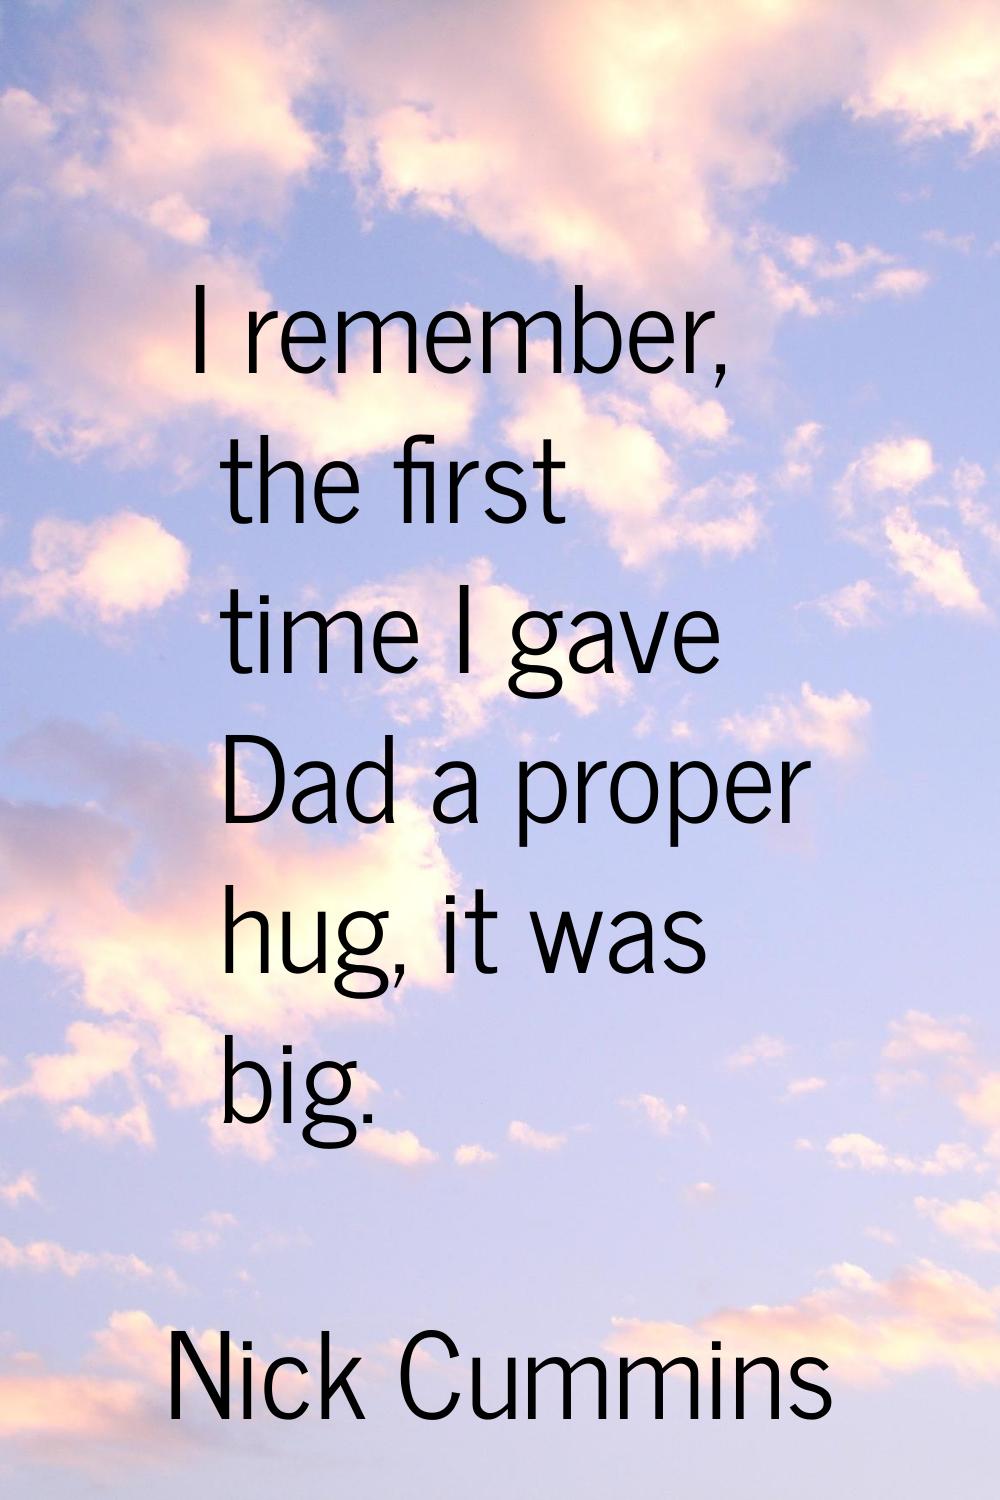 I remember, the first time I gave Dad a proper hug, it was big.